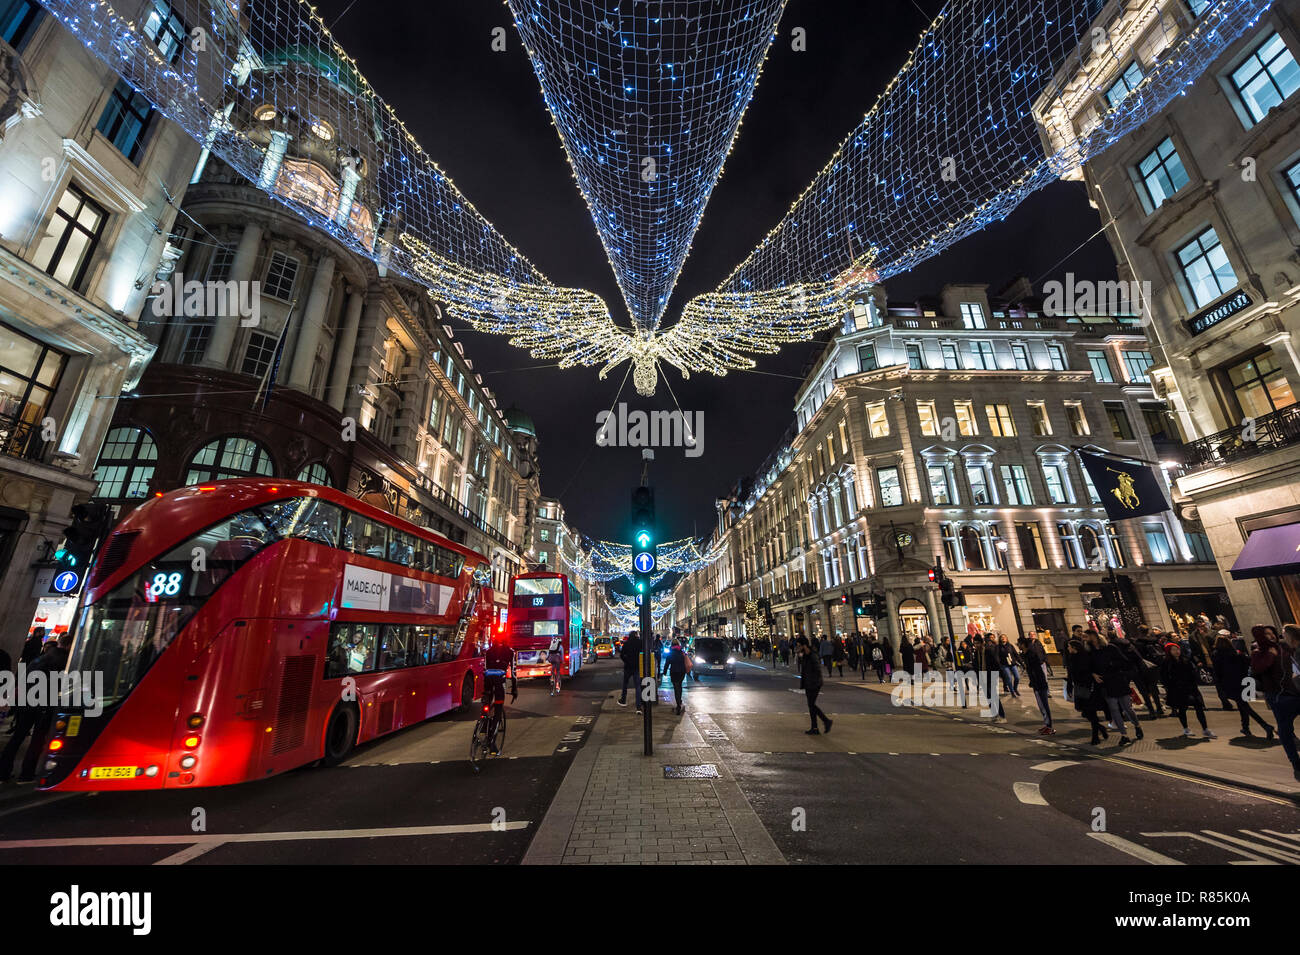 LONDON - NOVEMBER 23, 2018: Black Friday shoppers crowd the sidewalks of the luxury retail district of Regent Street, decorated with Christmas lights. Stock Photo